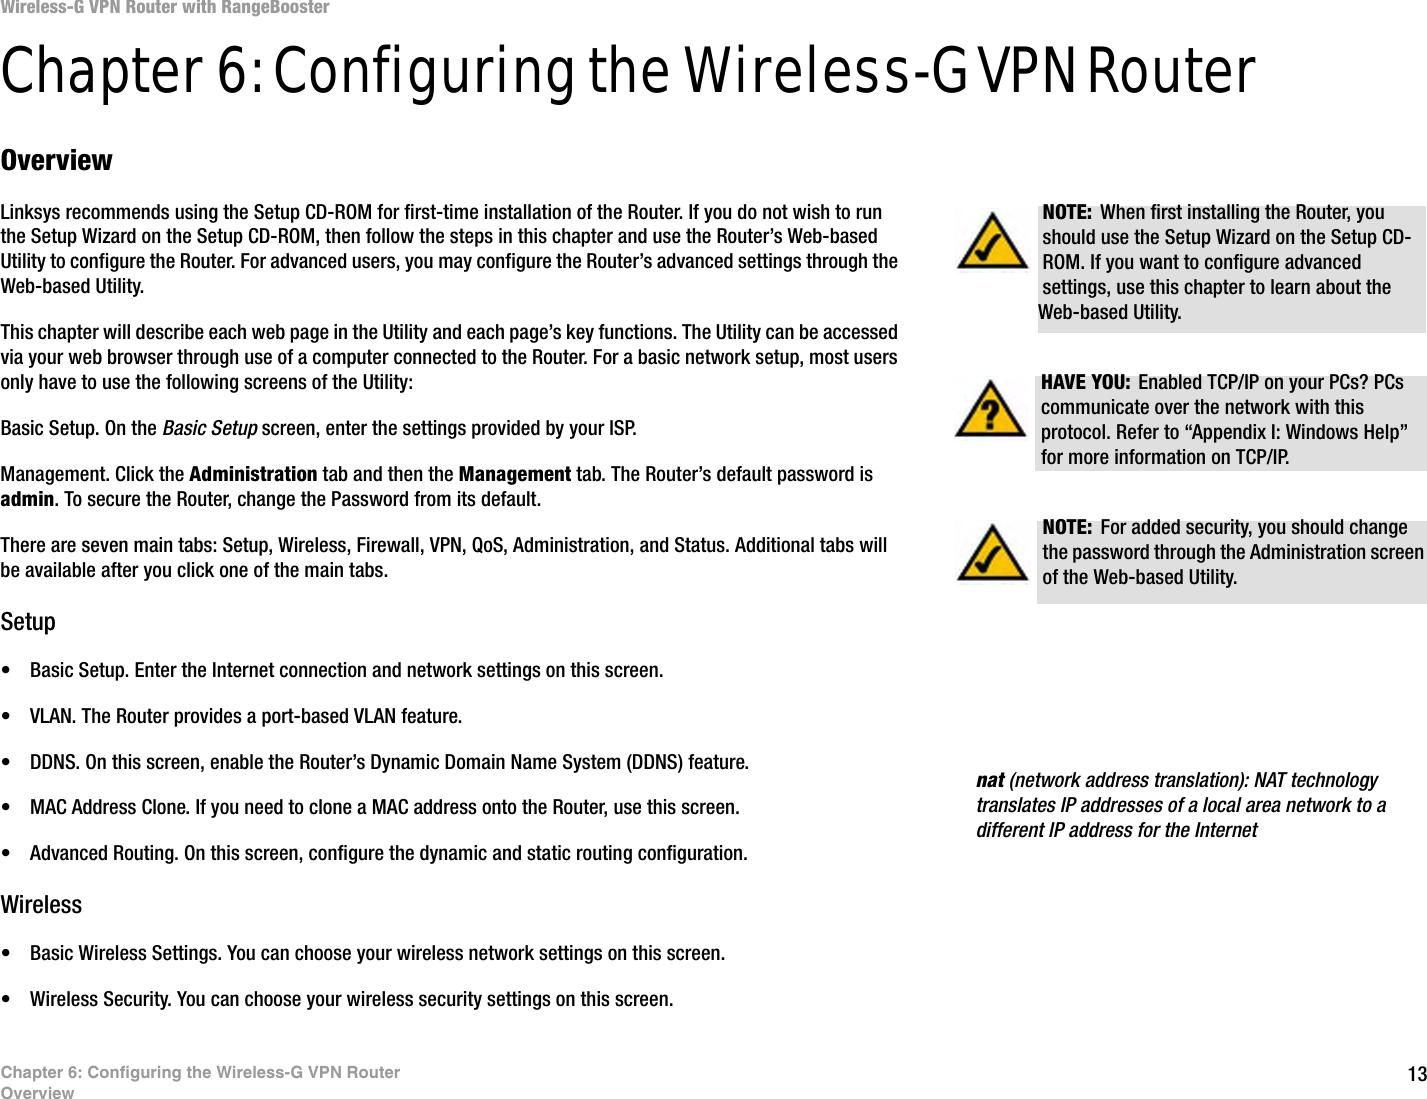 13Chapter 6: Configuring the Wireless-G VPN RouterOverviewWireless-G VPN Router with RangeBoosterChapter 6: Configuring the Wireless-G VPN RouterOverviewLinksys recommends using the Setup CD-ROM for first-time installation of the Router. If you do not wish to run the Setup Wizard on the Setup CD-ROM, then follow the steps in this chapter and use the Router’s Web-based Utility to configure the Router. For advanced users, you may configure the Router’s advanced settings through the Web-based Utility.This chapter will describe each web page in the Utility and each page’s key functions. The Utility can be accessed via your web browser through use of a computer connected to the Router. For a basic network setup, most users only have to use the following screens of the Utility:Basic Setup. On the Basic Setup screen, enter the settings provided by your ISP.Management. Click the Administration tab and then the Management tab. The Router’s default password is admin. To secure the Router, change the Password from its default.There are seven main tabs: Setup, Wireless, Firewall, VPN, QoS, Administration, and Status. Additional tabs will be available after you click one of the main tabs.Setup• Basic Setup. Enter the Internet connection and network settings on this screen.• VLAN. The Router provides a port-based VLAN feature. • DDNS. On this screen, enable the Router’s Dynamic Domain Name System (DDNS) feature.• MAC Address Clone. If you need to clone a MAC address onto the Router, use this screen.• Advanced Routing. On this screen, configure the dynamic and static routing configuration.Wireless• Basic Wireless Settings. You can choose your wireless network settings on this screen.• Wireless Security. You can choose your wireless security settings on this screen.NOTE: For added security, you should change the password through the Administration screen of the Web-based Utility.nat (network address translation): NAT technology translates IP addresses of a local area network to a different IP address for the InternetHAVE YOU: Enabled TCP/IP on your PCs? PCs communicate over the network with this protocol. Refer to “Appendix I: Windows Help” for more information on TCP/IP.NOTE: When first installing the Router, you should use the Setup Wizard on the Setup CD-ROM. If you want to configure advanced settings, use this chapter to learn about the Web-based Utility.